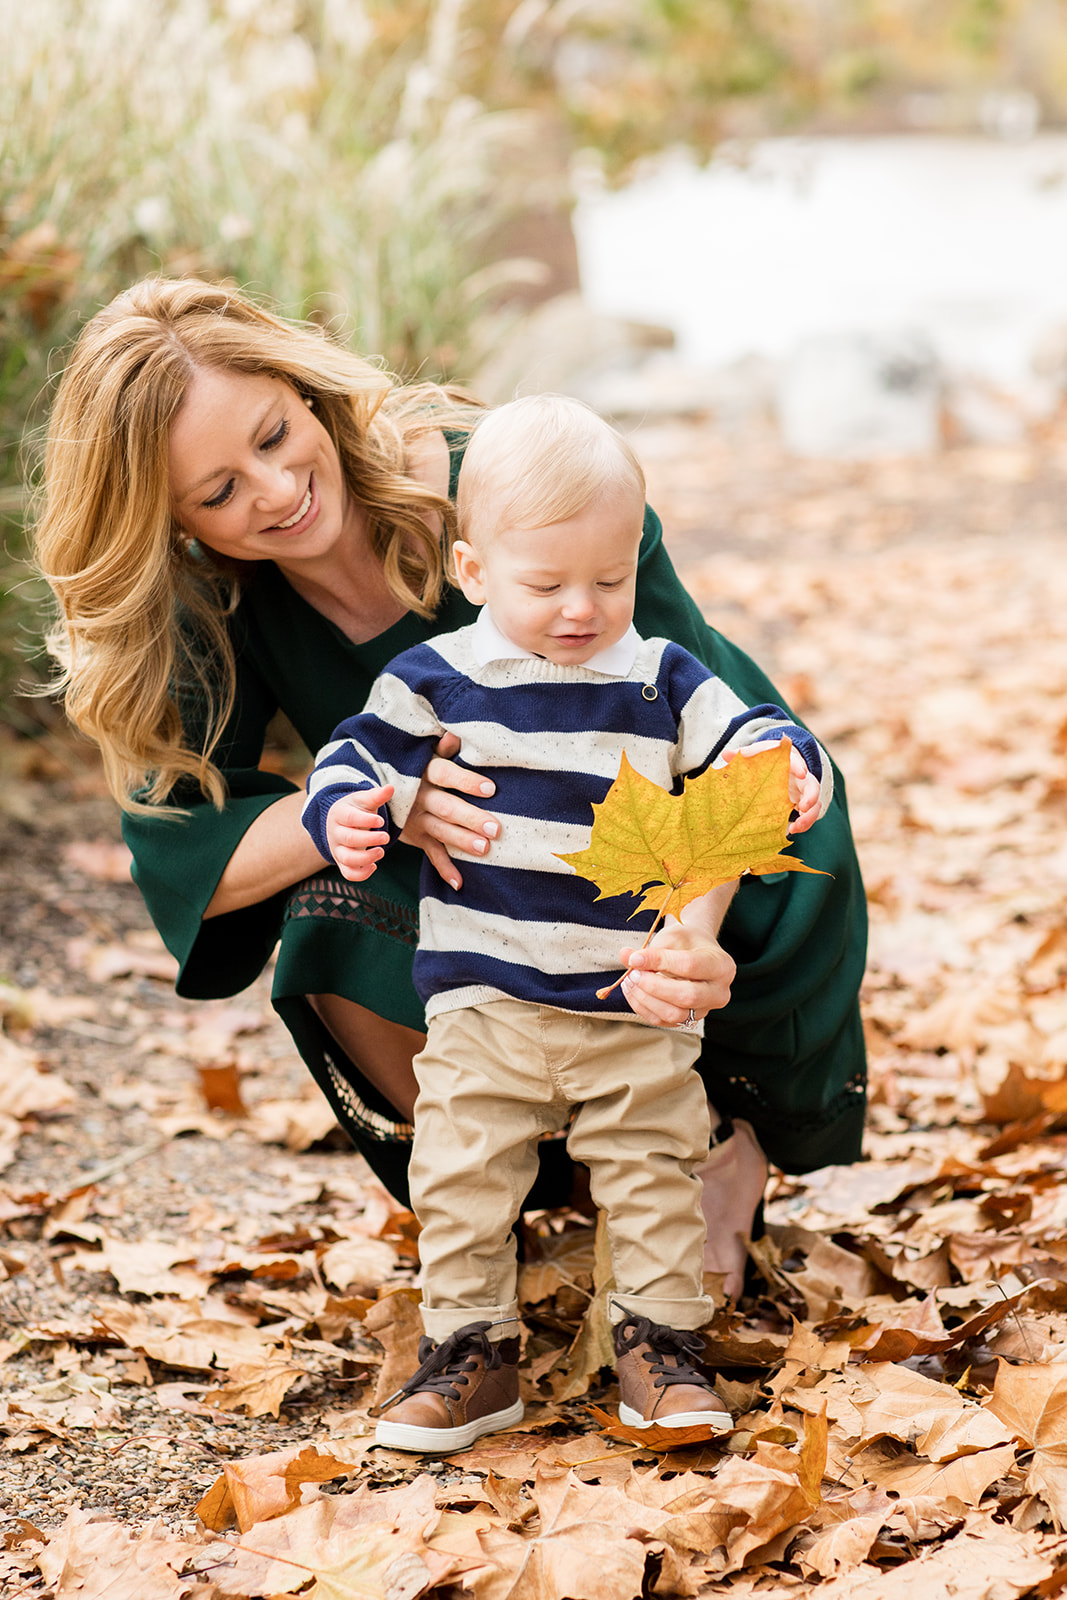 When Should You Book Fall Family Photos - Image Property of www.j-dphoto.com